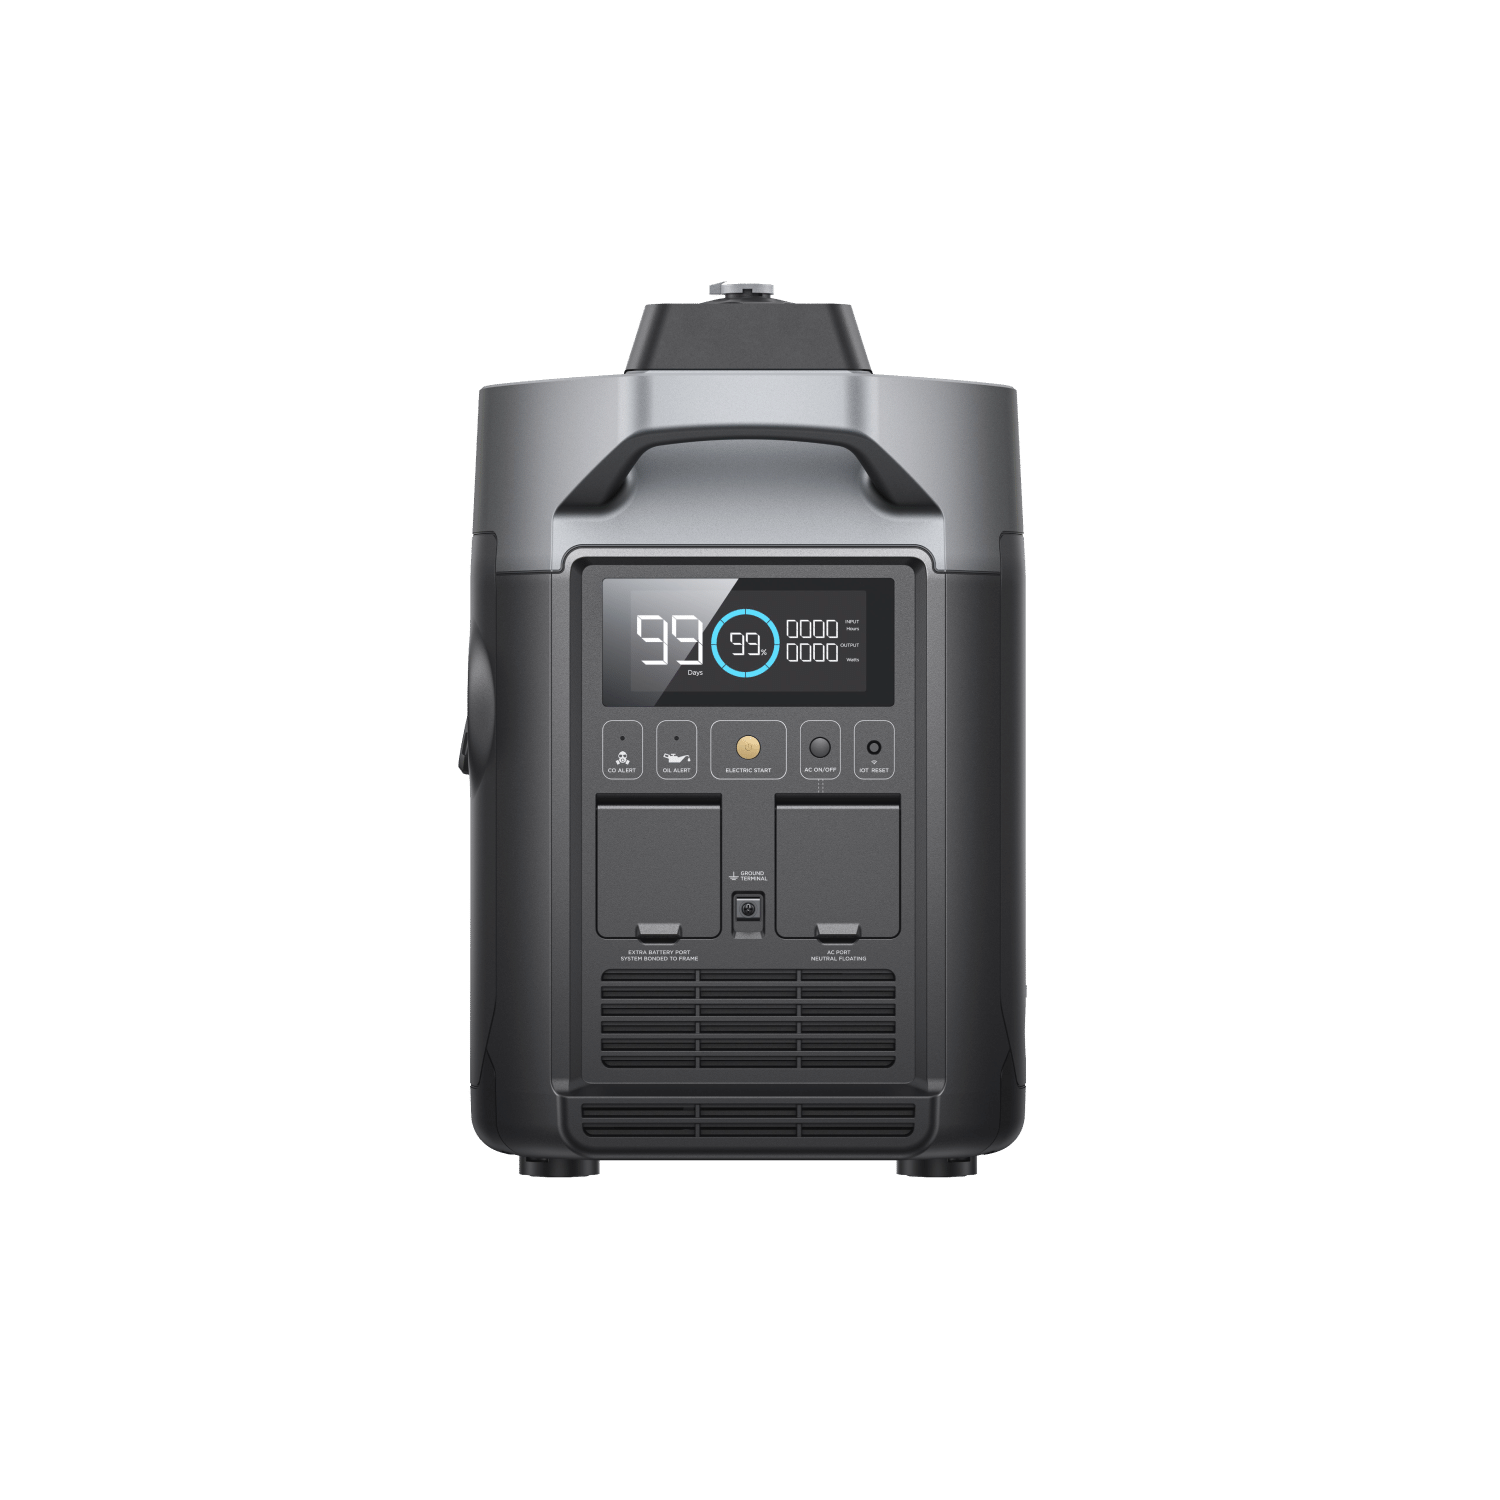 EcoFlow EcoFlow (Dual Fuel) Smart Generator (Recommended Accessory) Giving Back